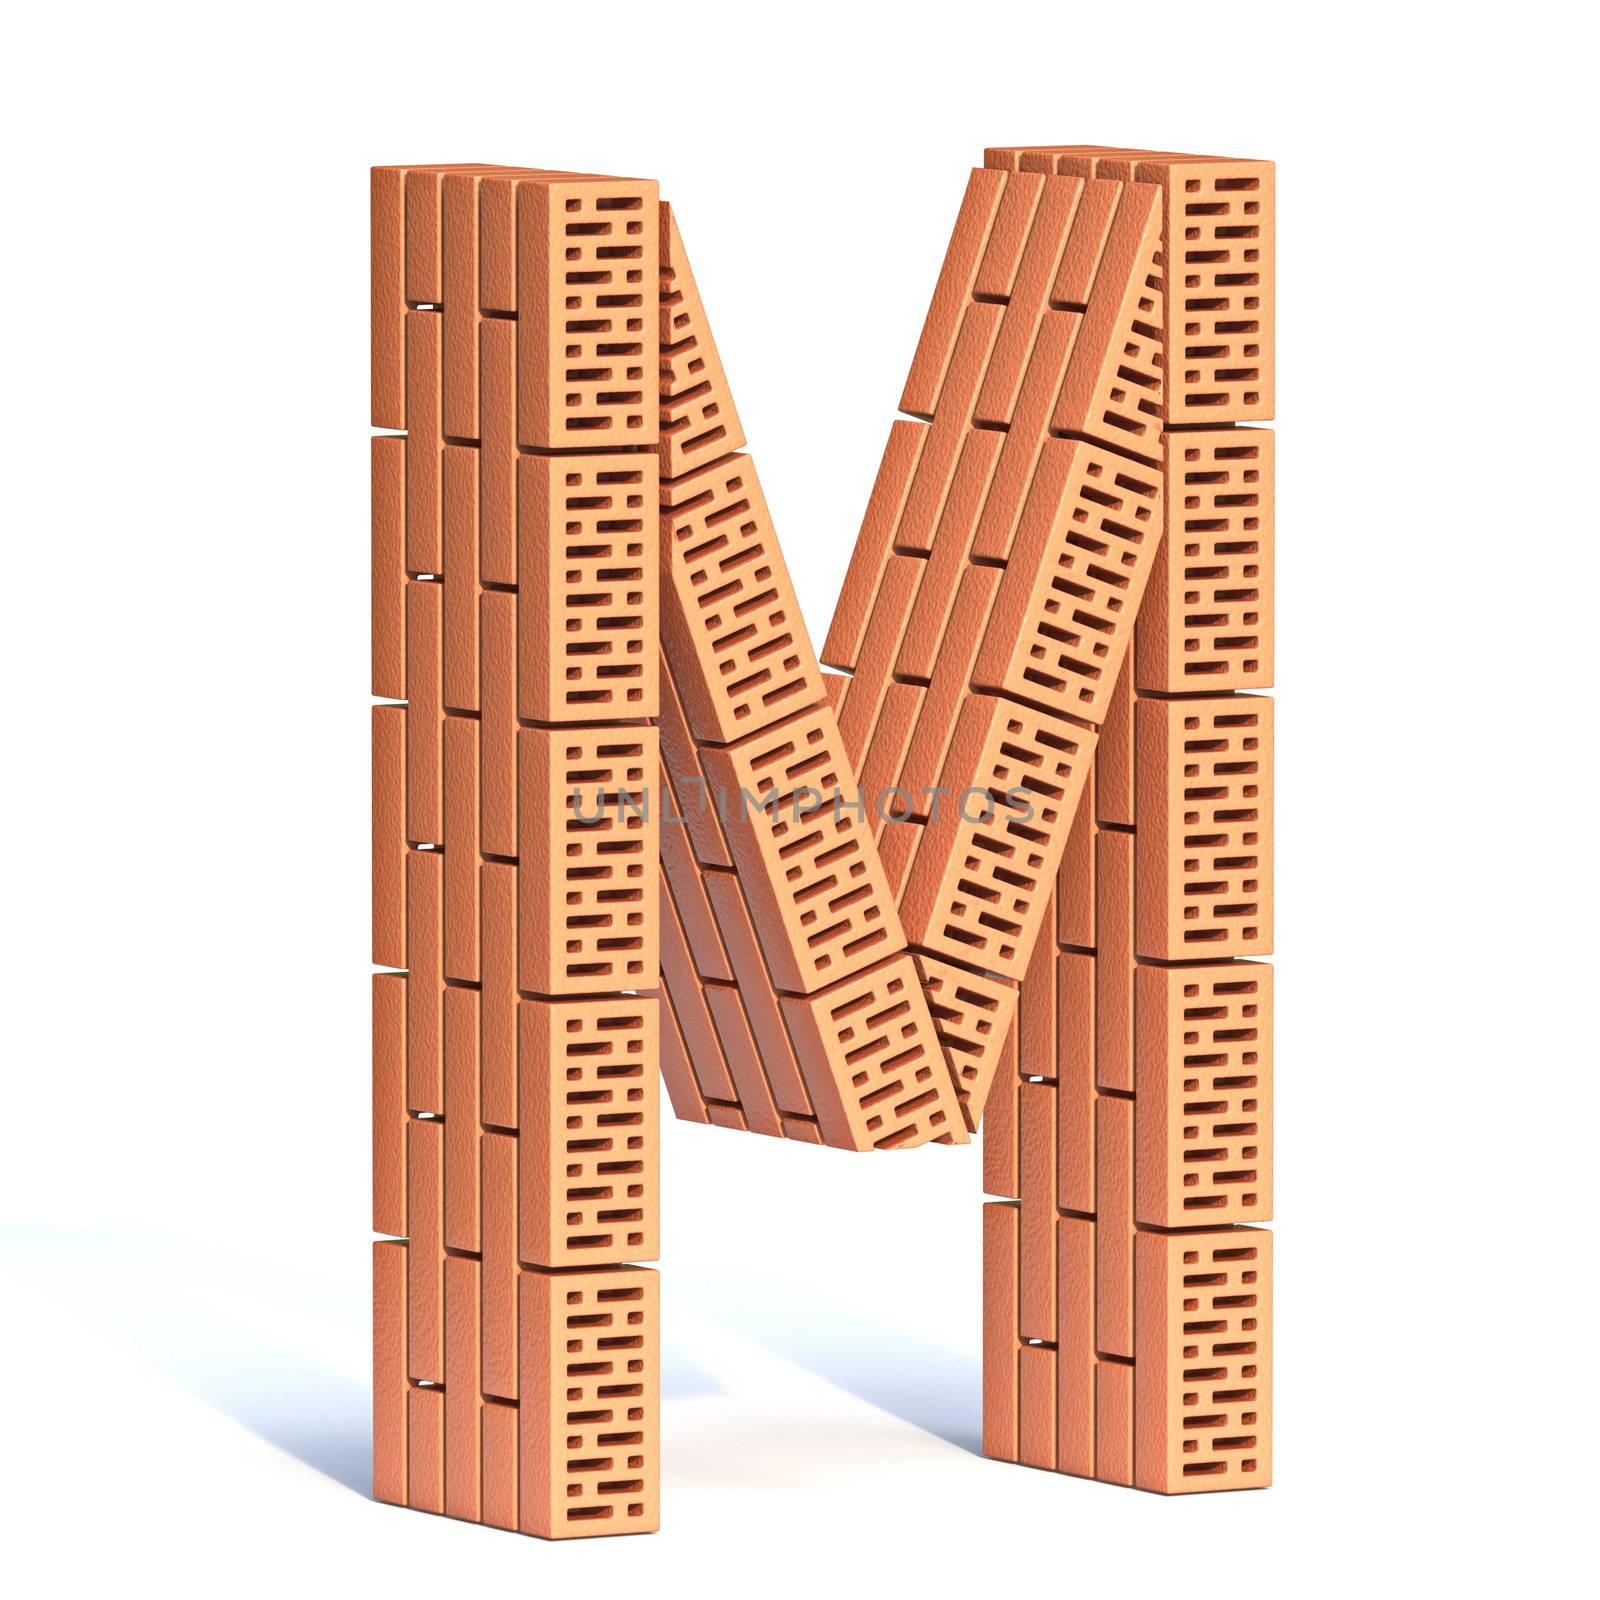 Brick wall font Letter M 3D render illustration isolated on white background